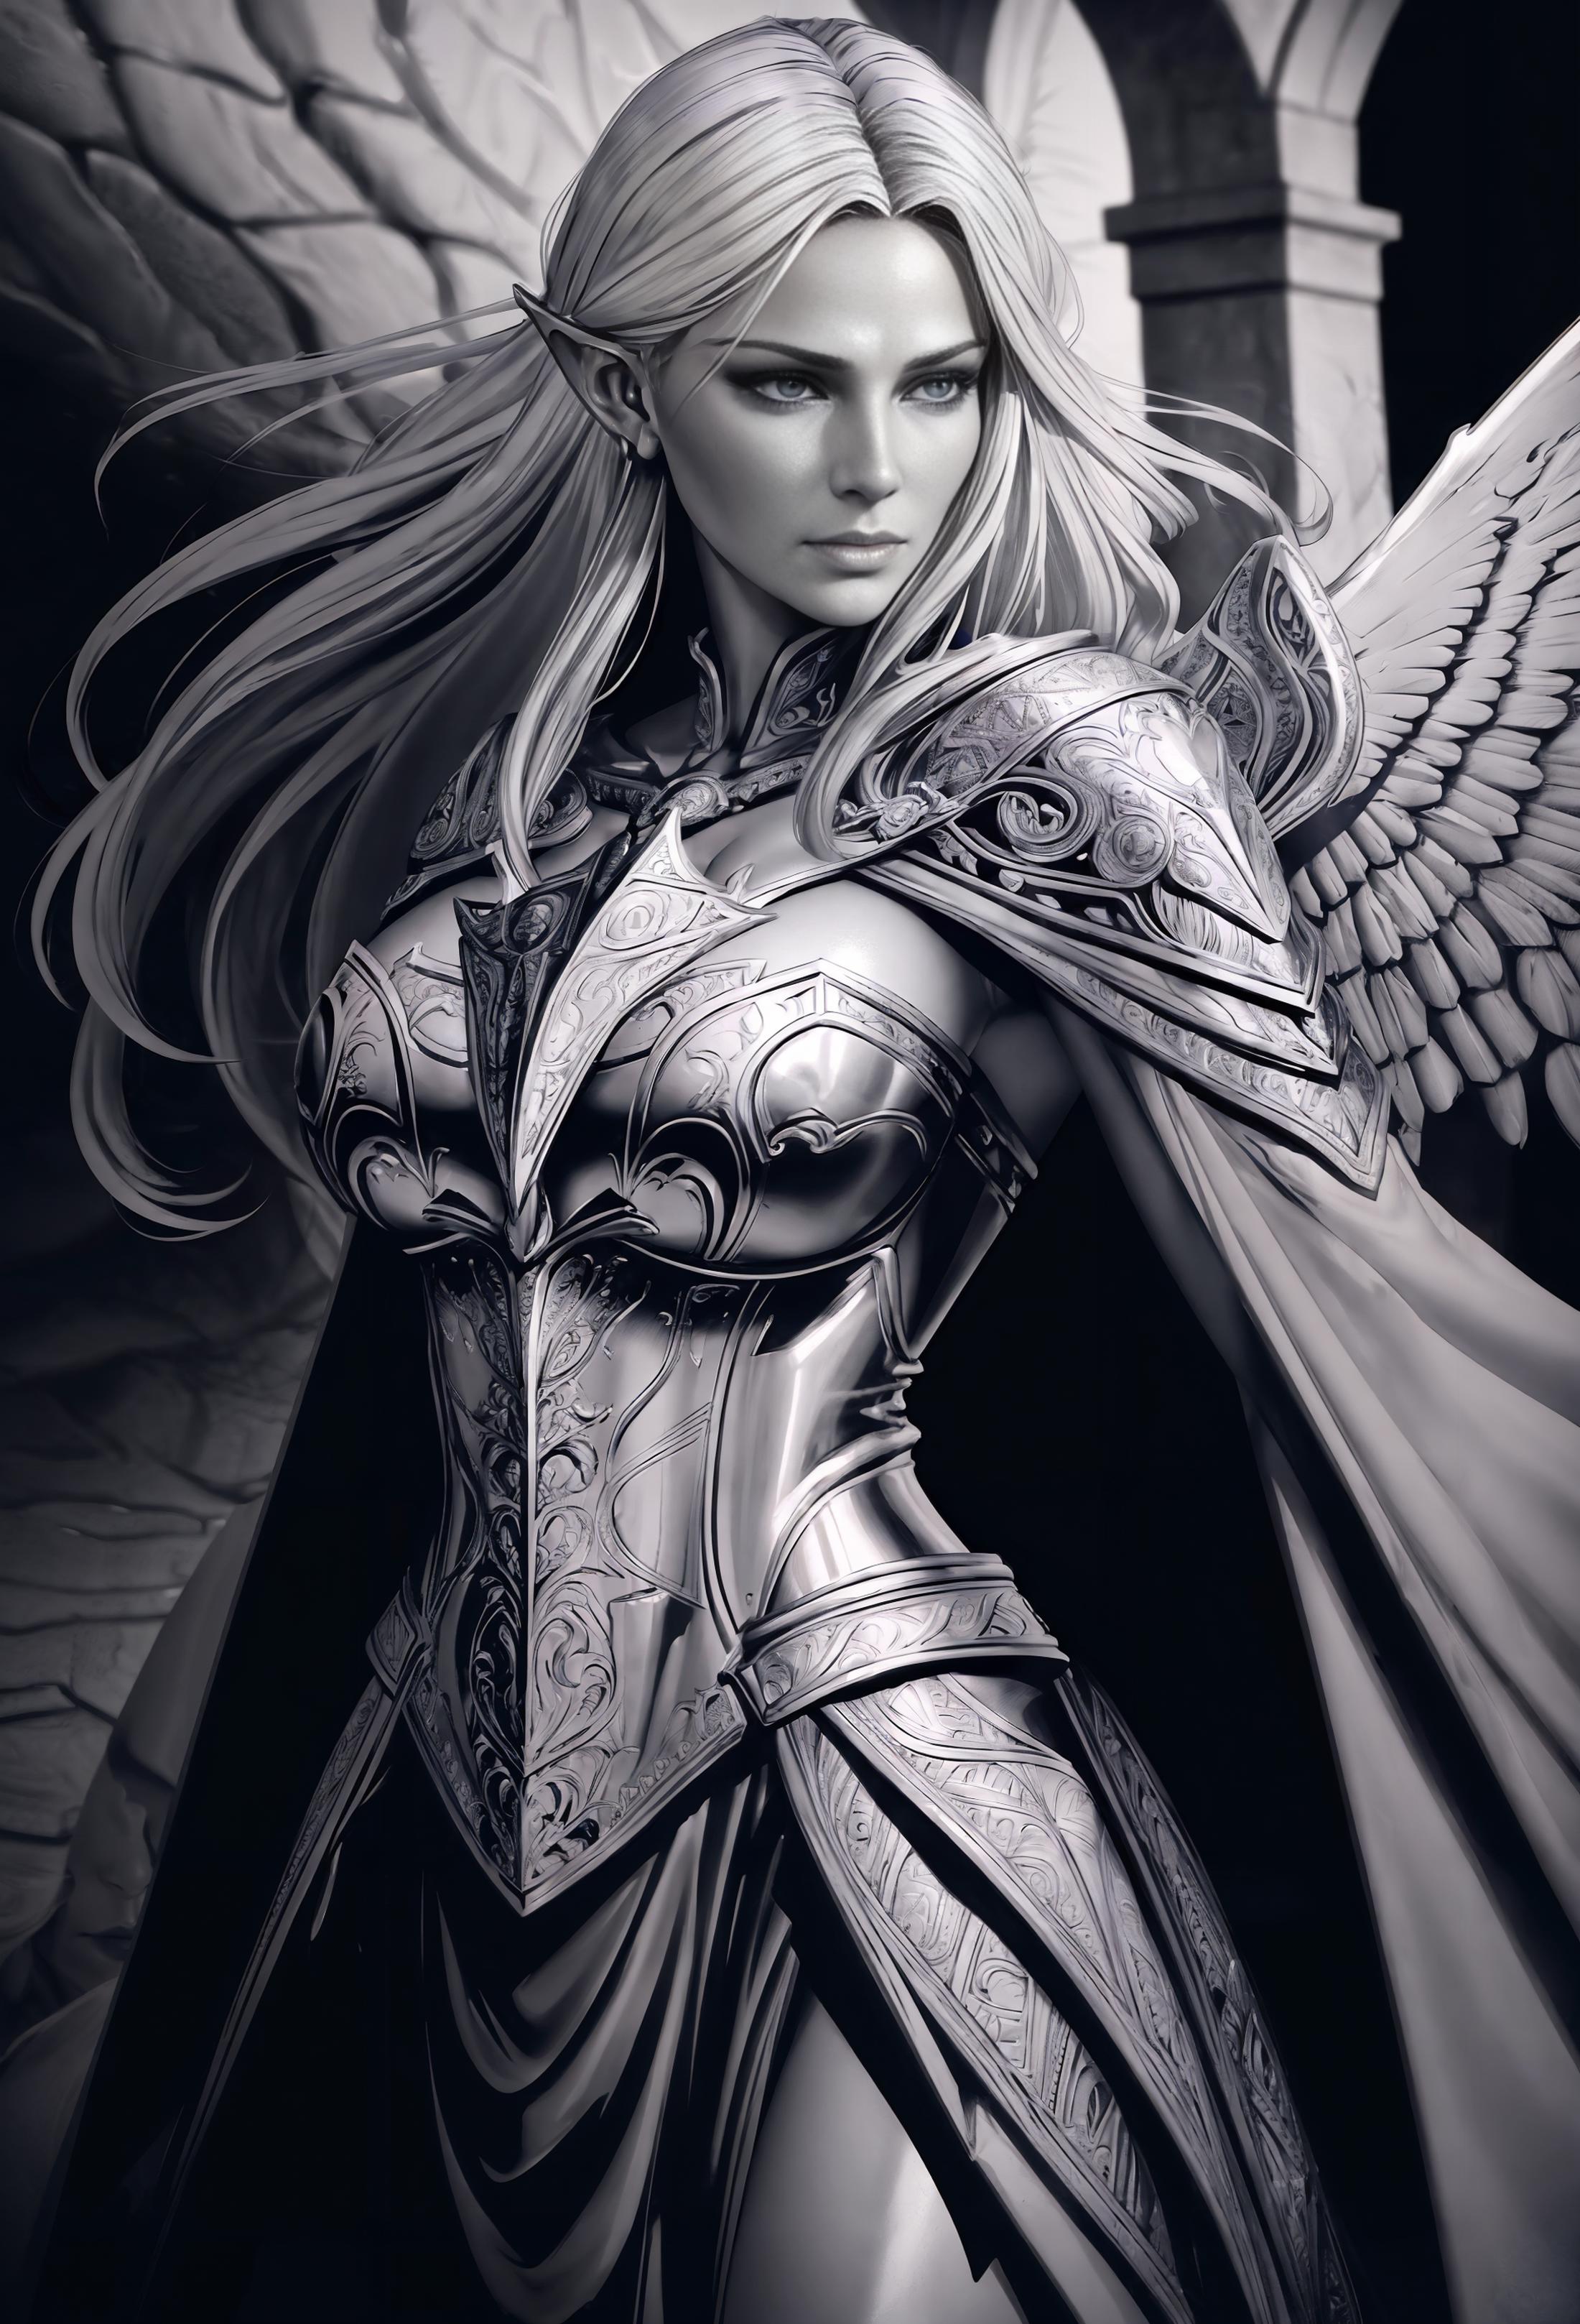 A fantasy artwork of a woman with angel wings and a silver armor.